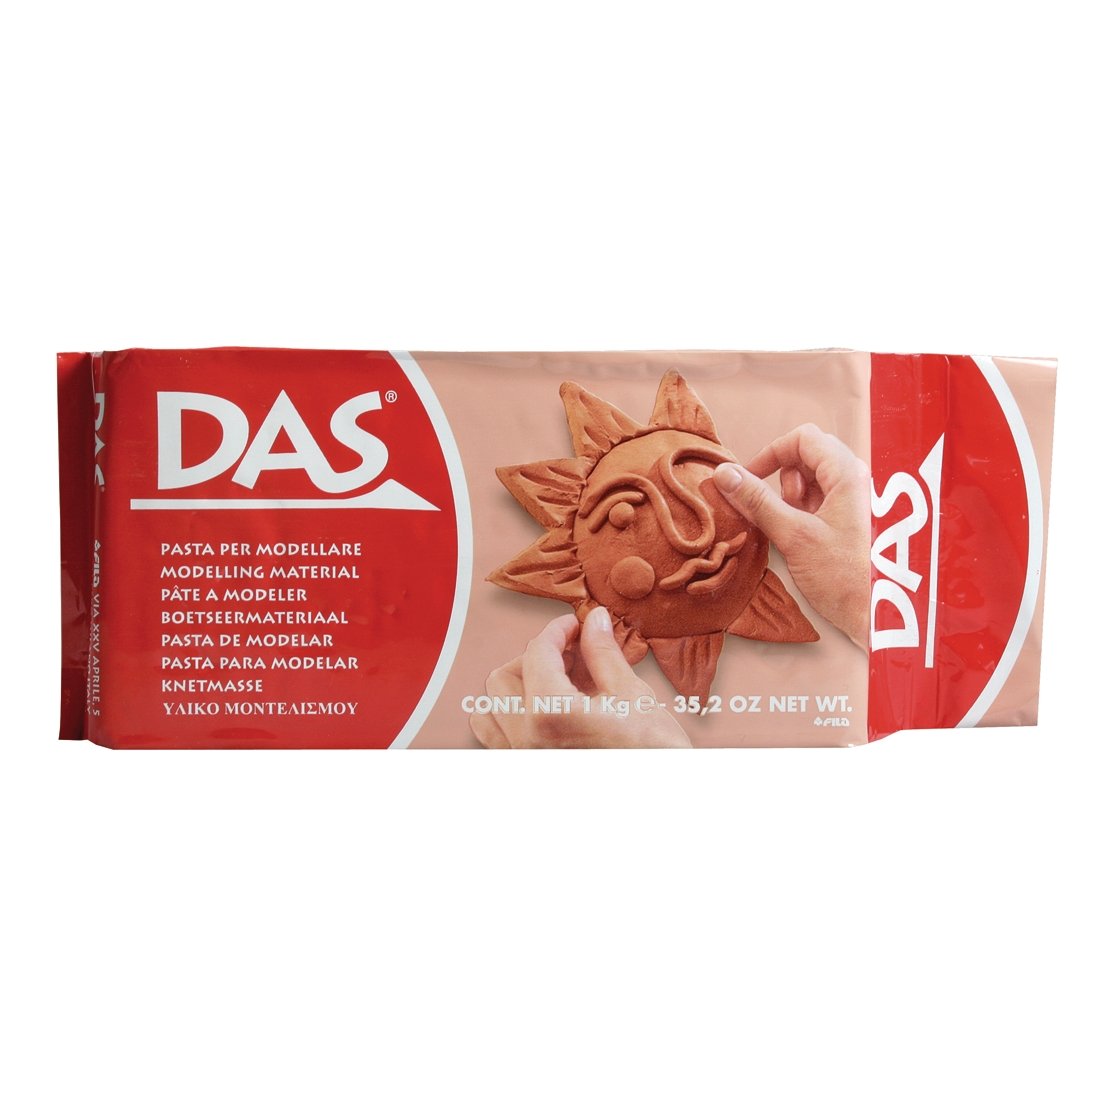 DAS Air Drying Modelling Clay for Art & Craft in White or